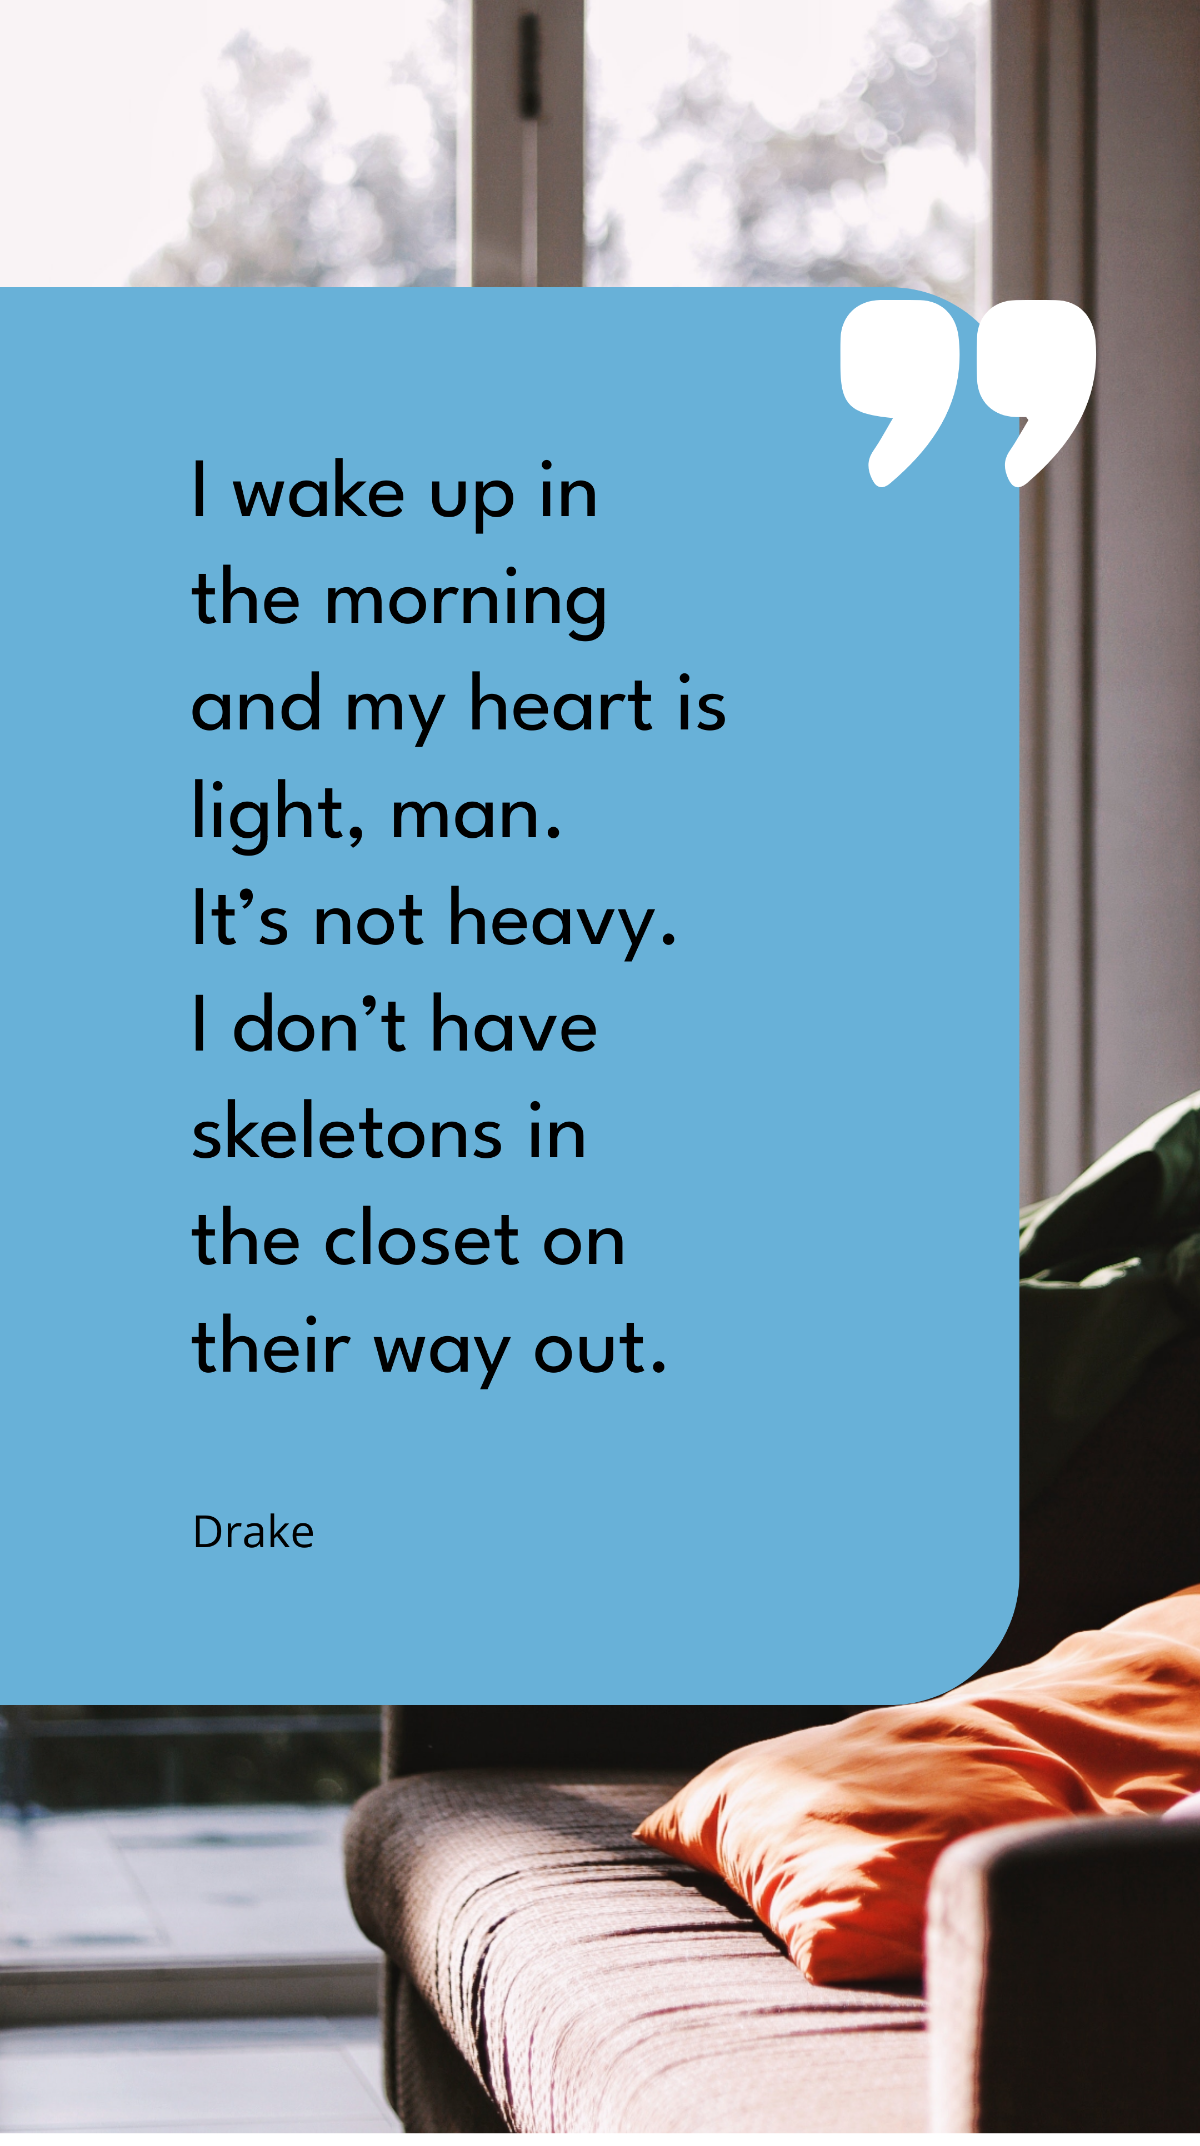 Drake - I wake up in the morning and my heart is light, man. It’s not heavy. I don’t have skeletons in the closet on their way out. Template